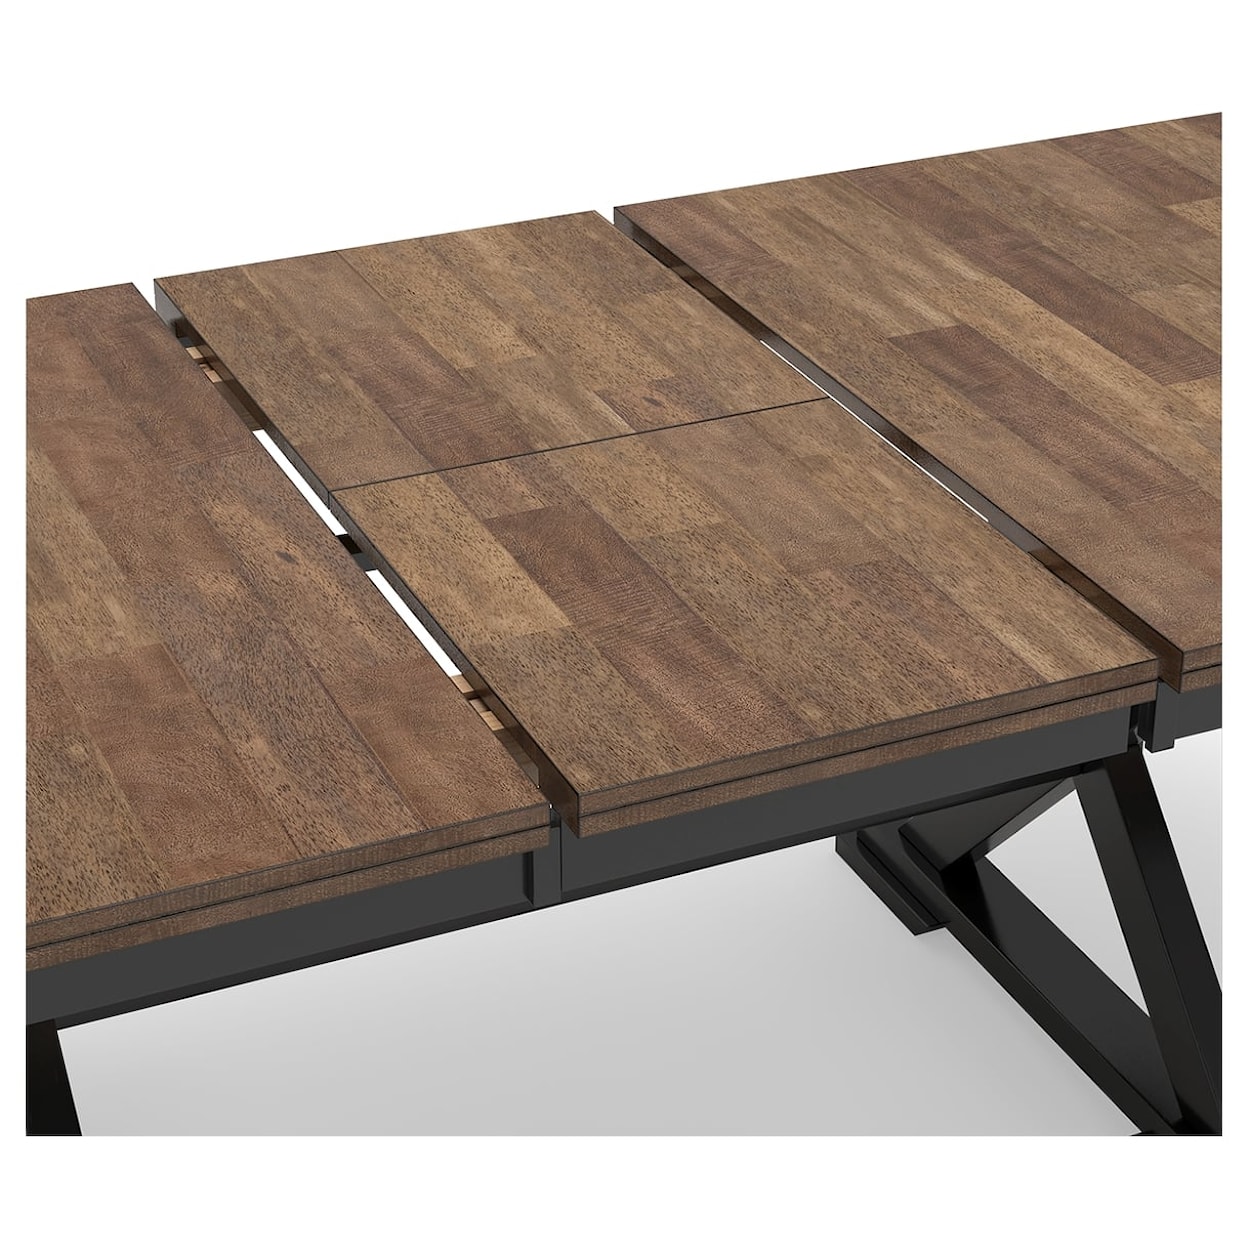 Signature Design by Ashley Furniture Wildenauer Rectangular Dining Room Extension Table